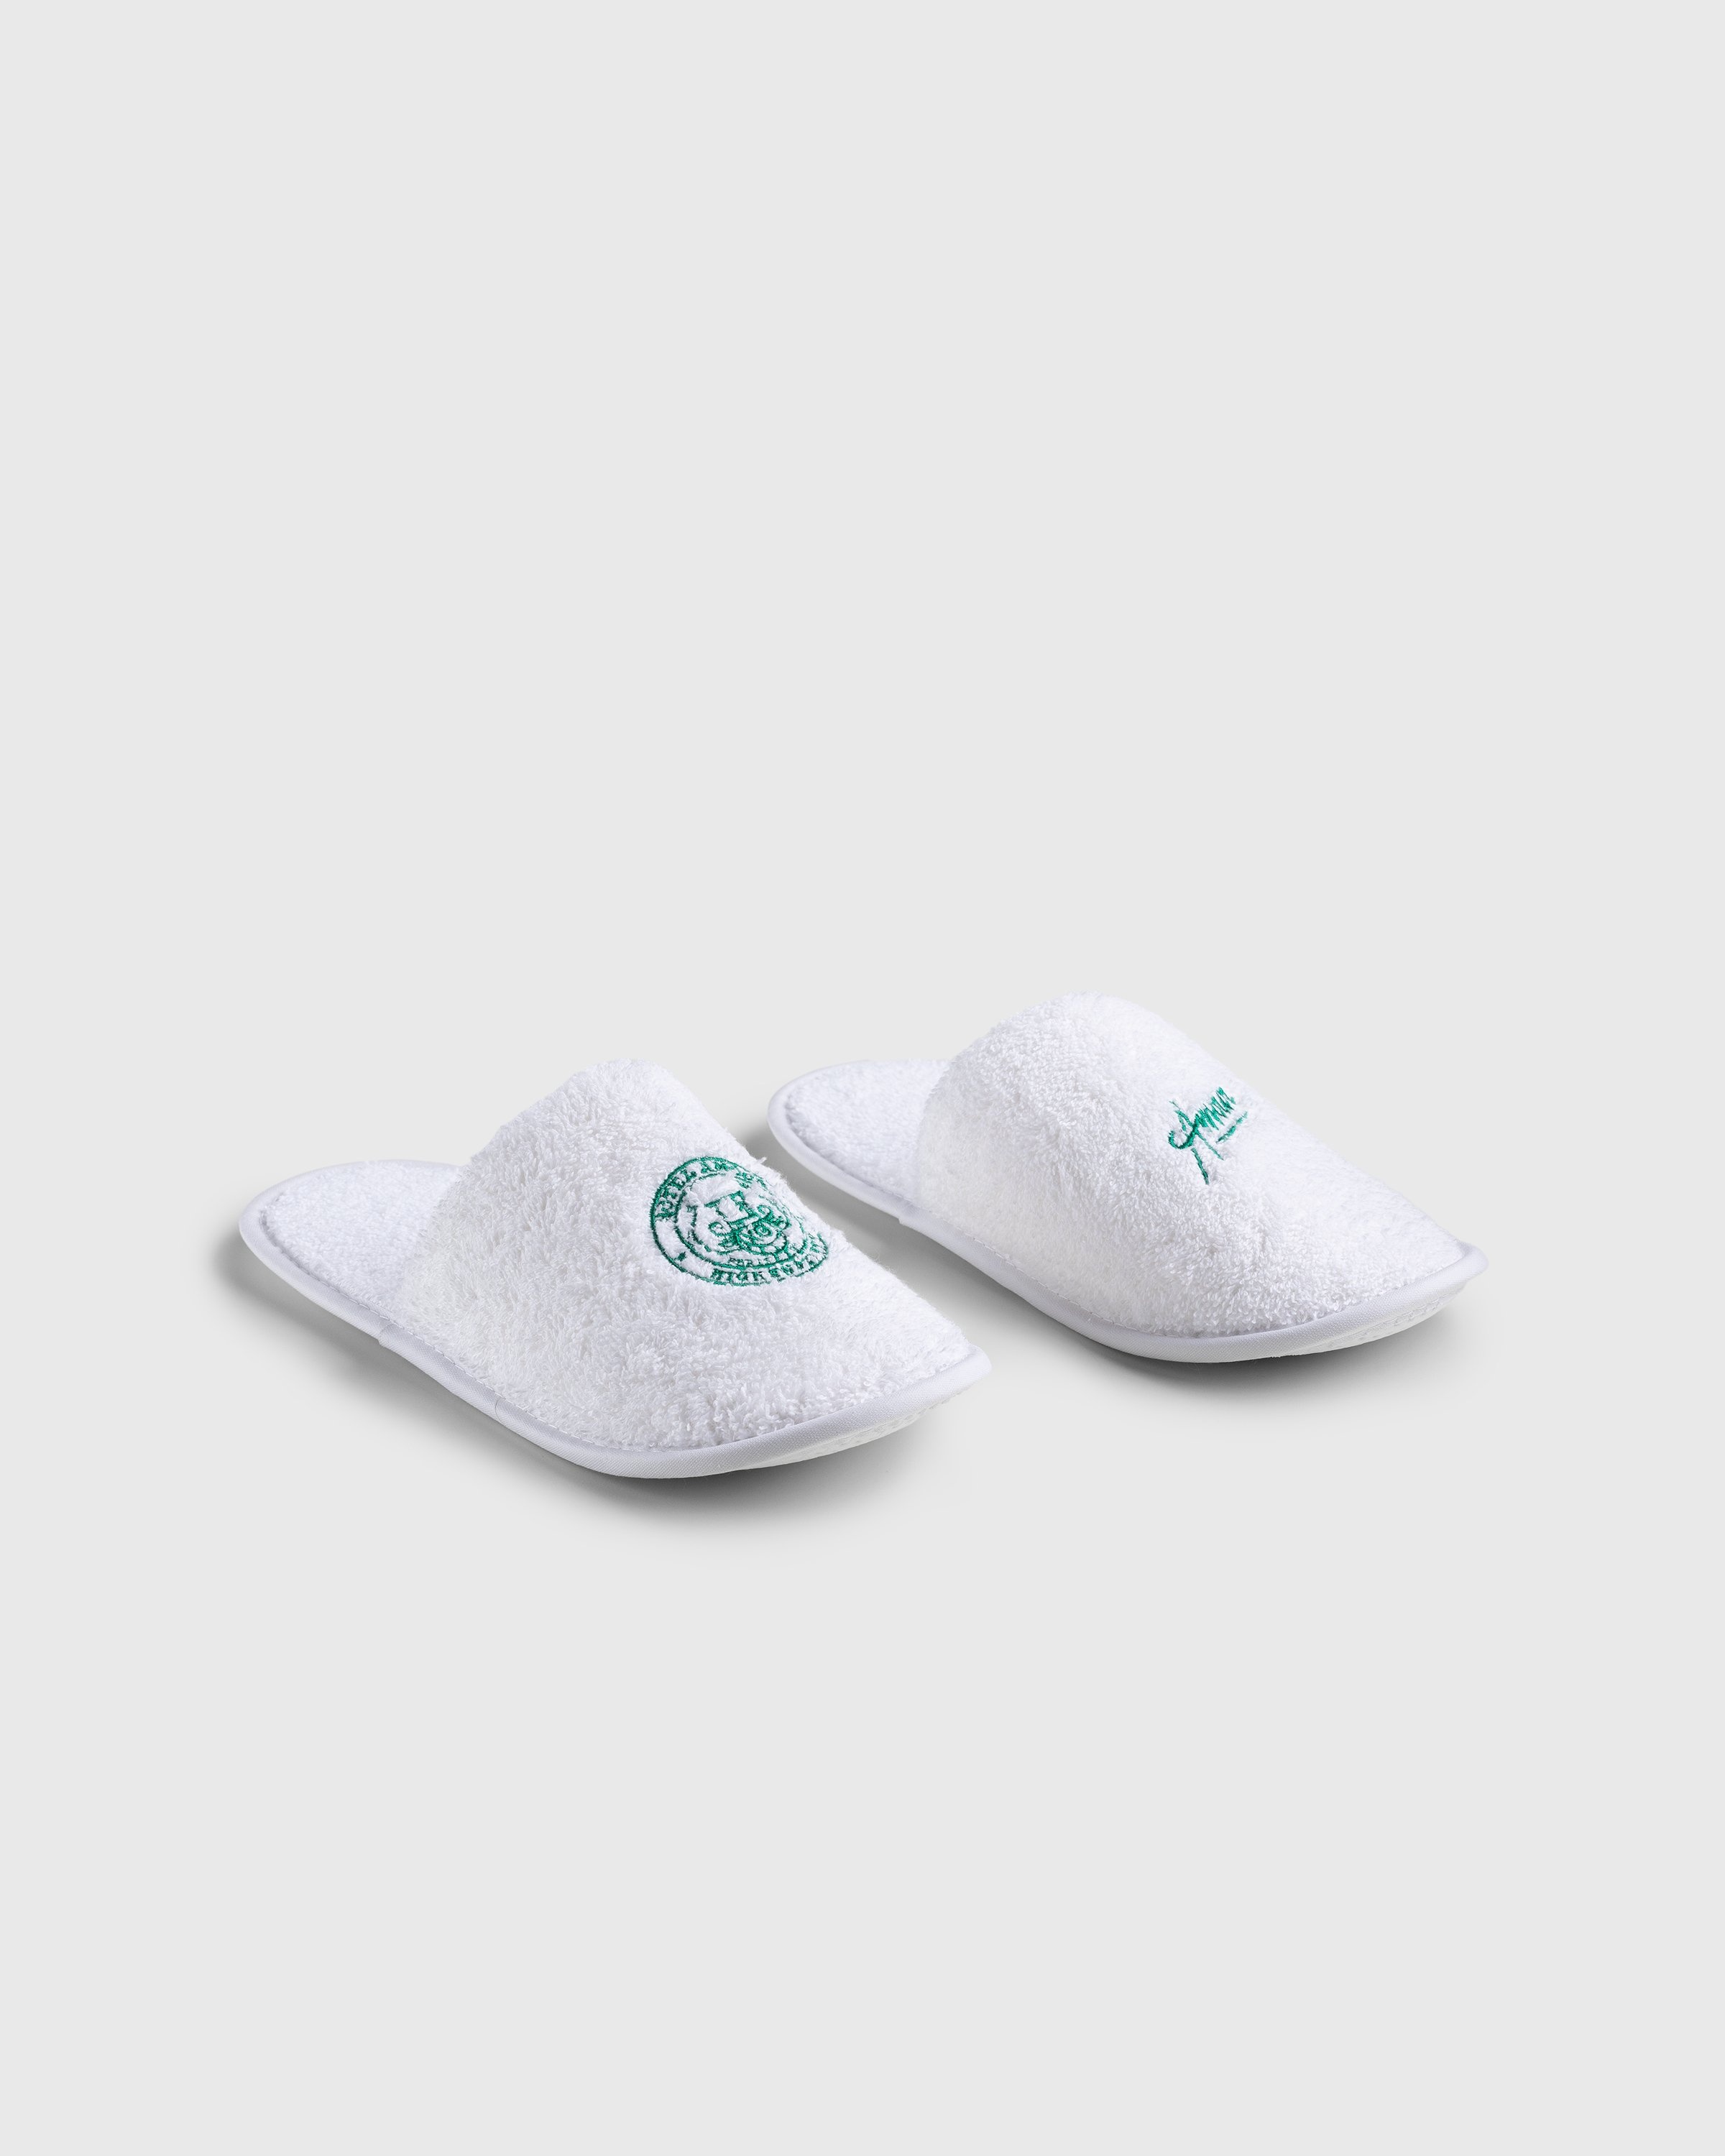 Hotel Amour x Highsnobiety – Not In Paris 4 Slippers White - Sandals - White - Image 4